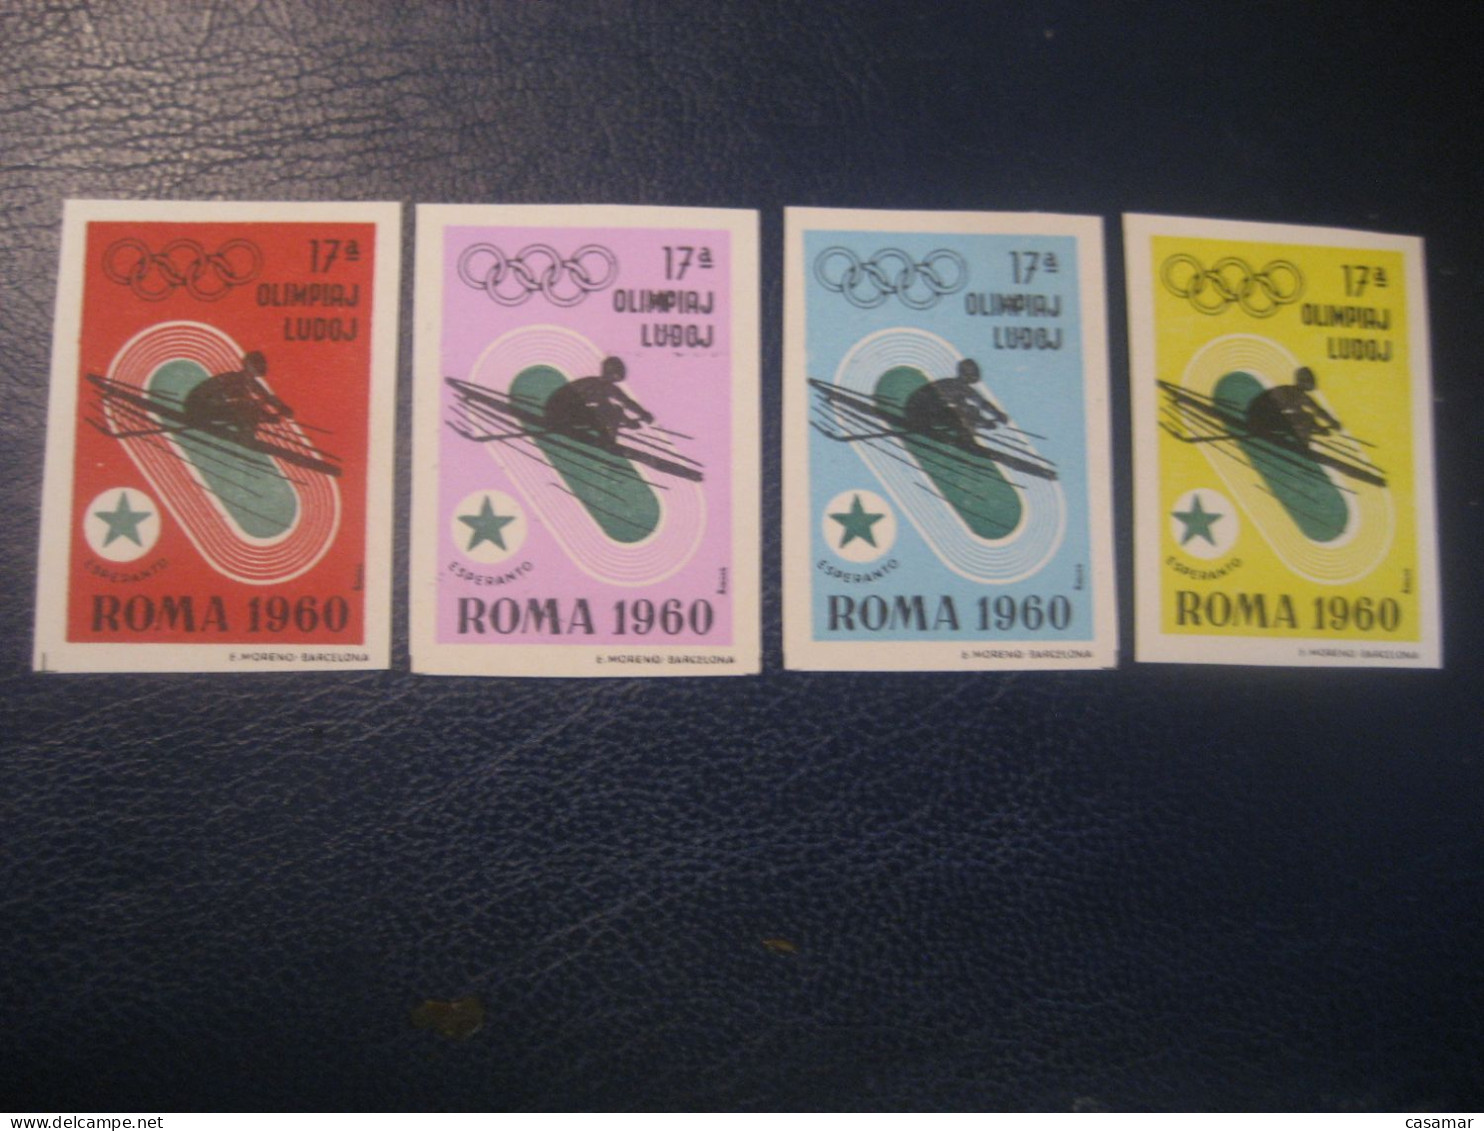 ROMA 1960 Rowing Aviron Olympic Games Olympics Esperanto 4 Imperforated Poster Stamp Vignette ITALY Spain Label - Rowing